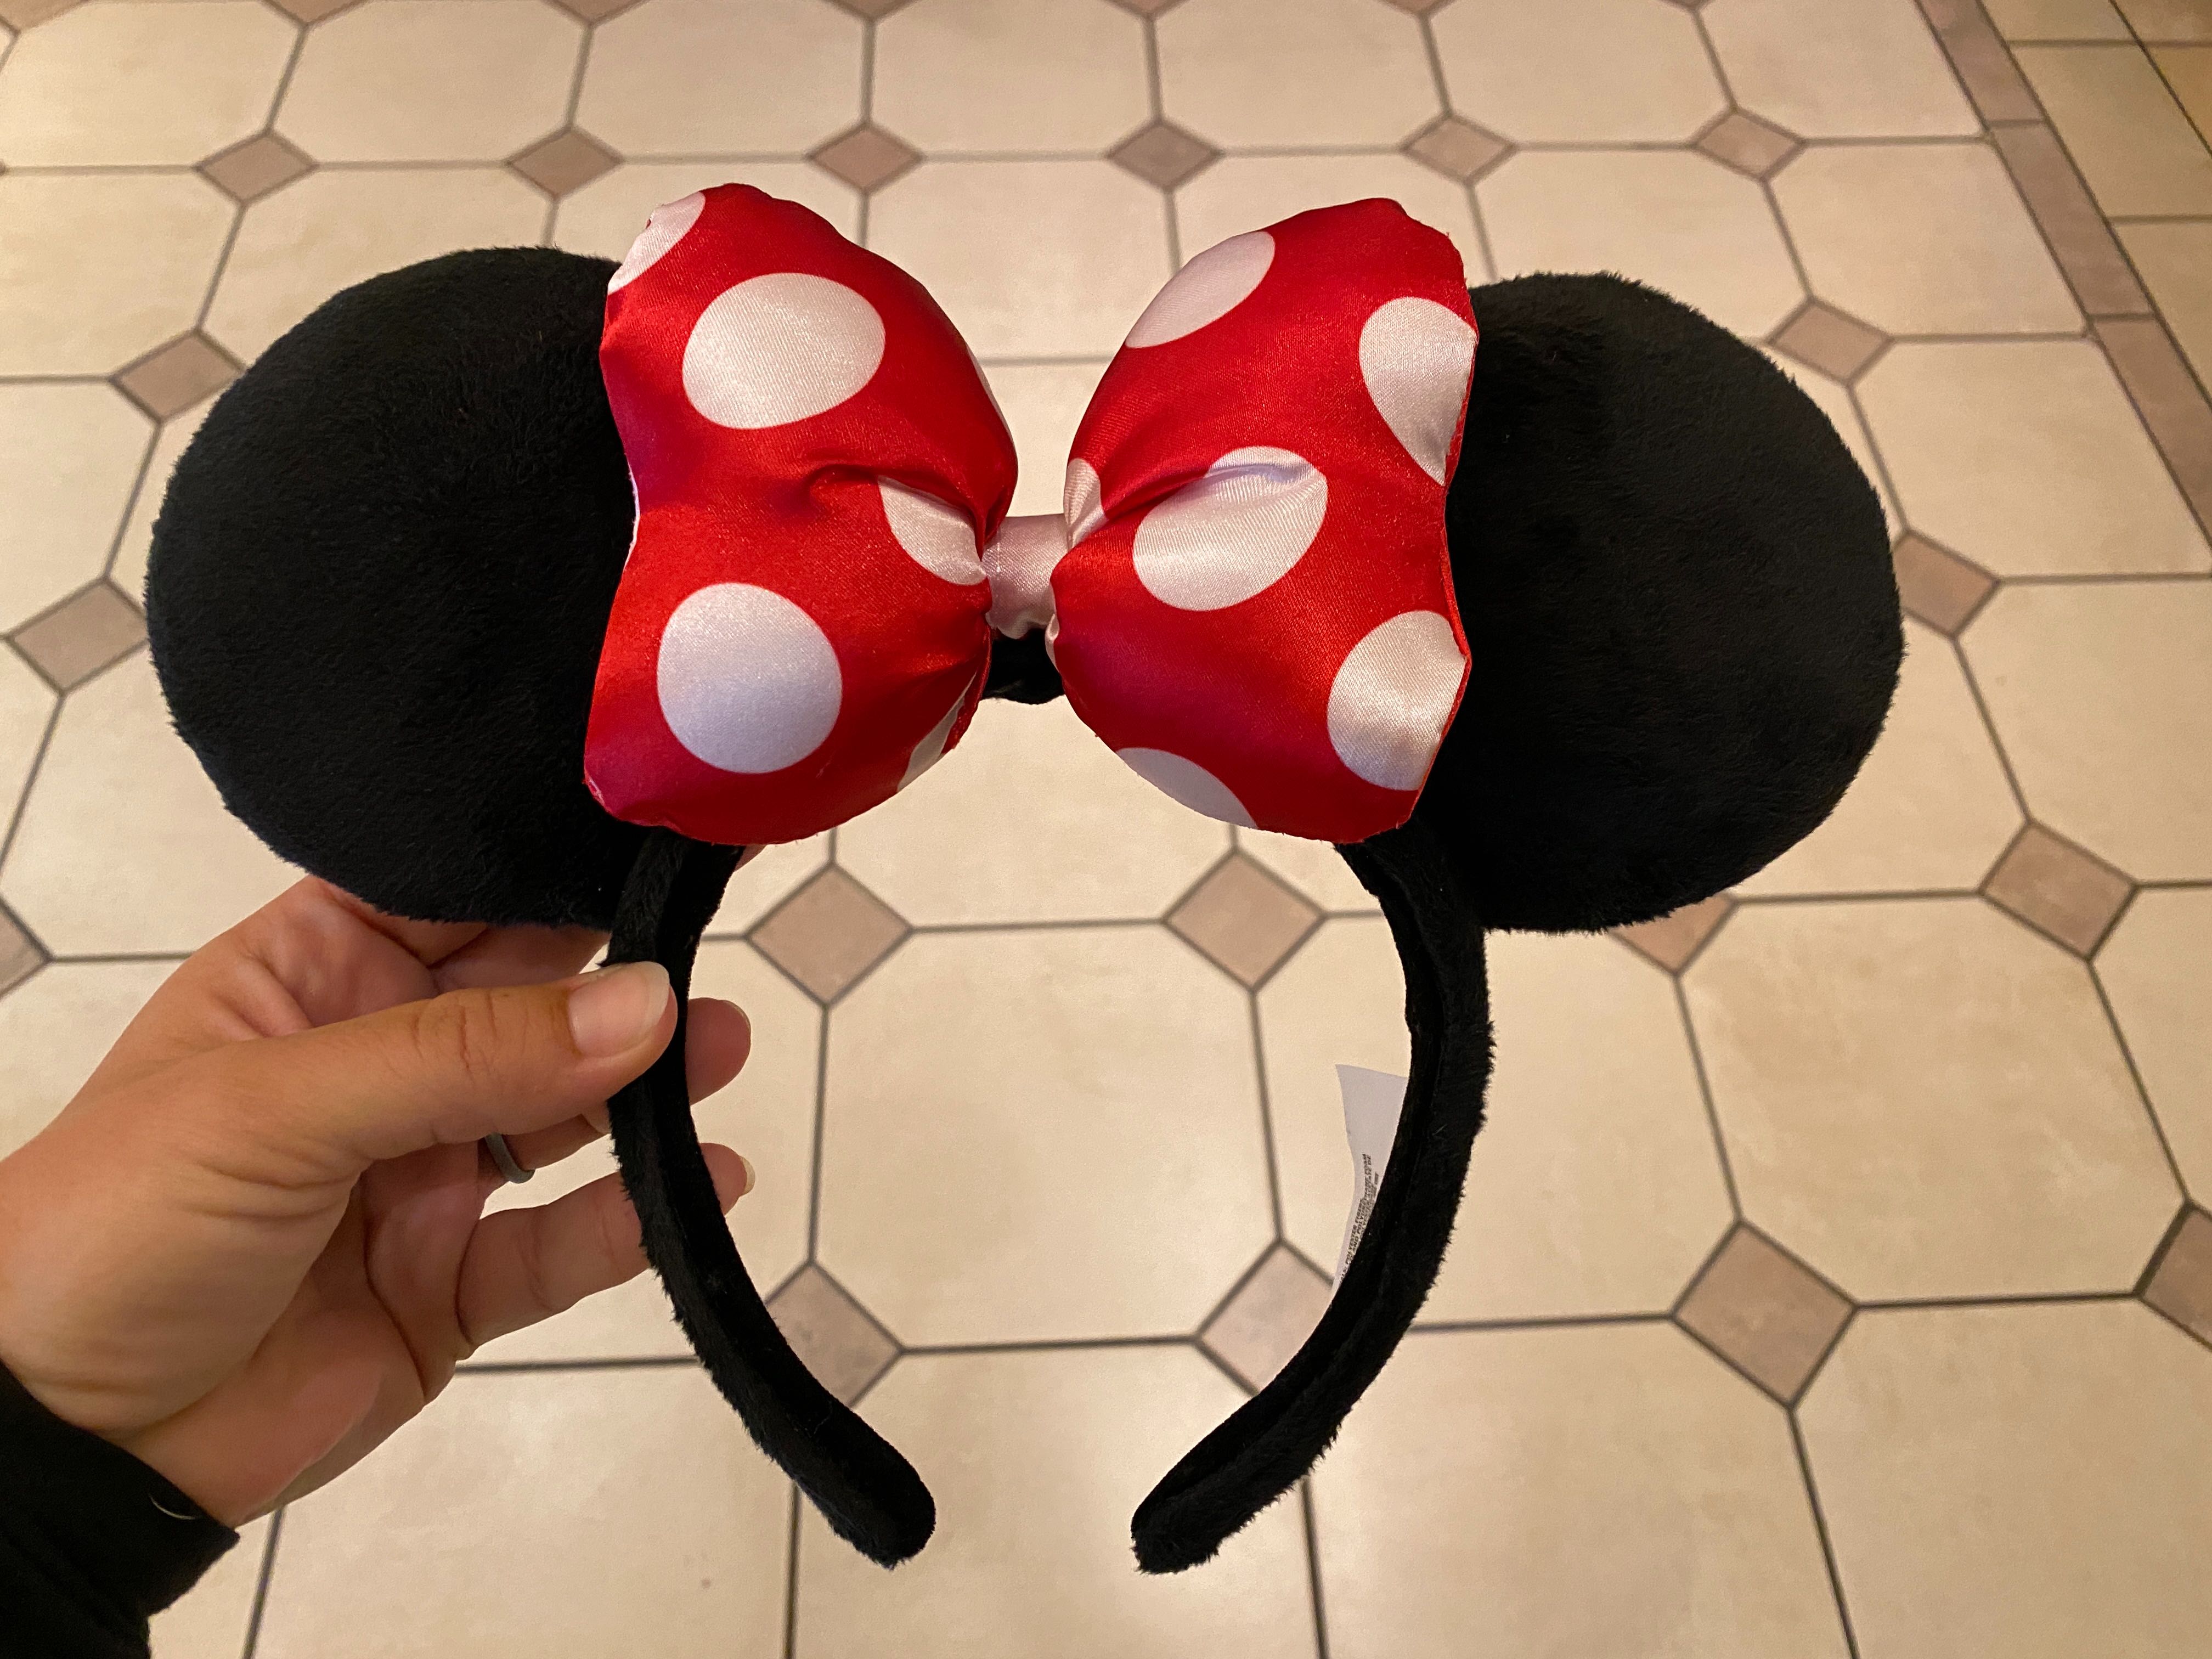 PHOTOS New Redesigned Classic Minnie Mouse Ears Arrive at Walt Disney